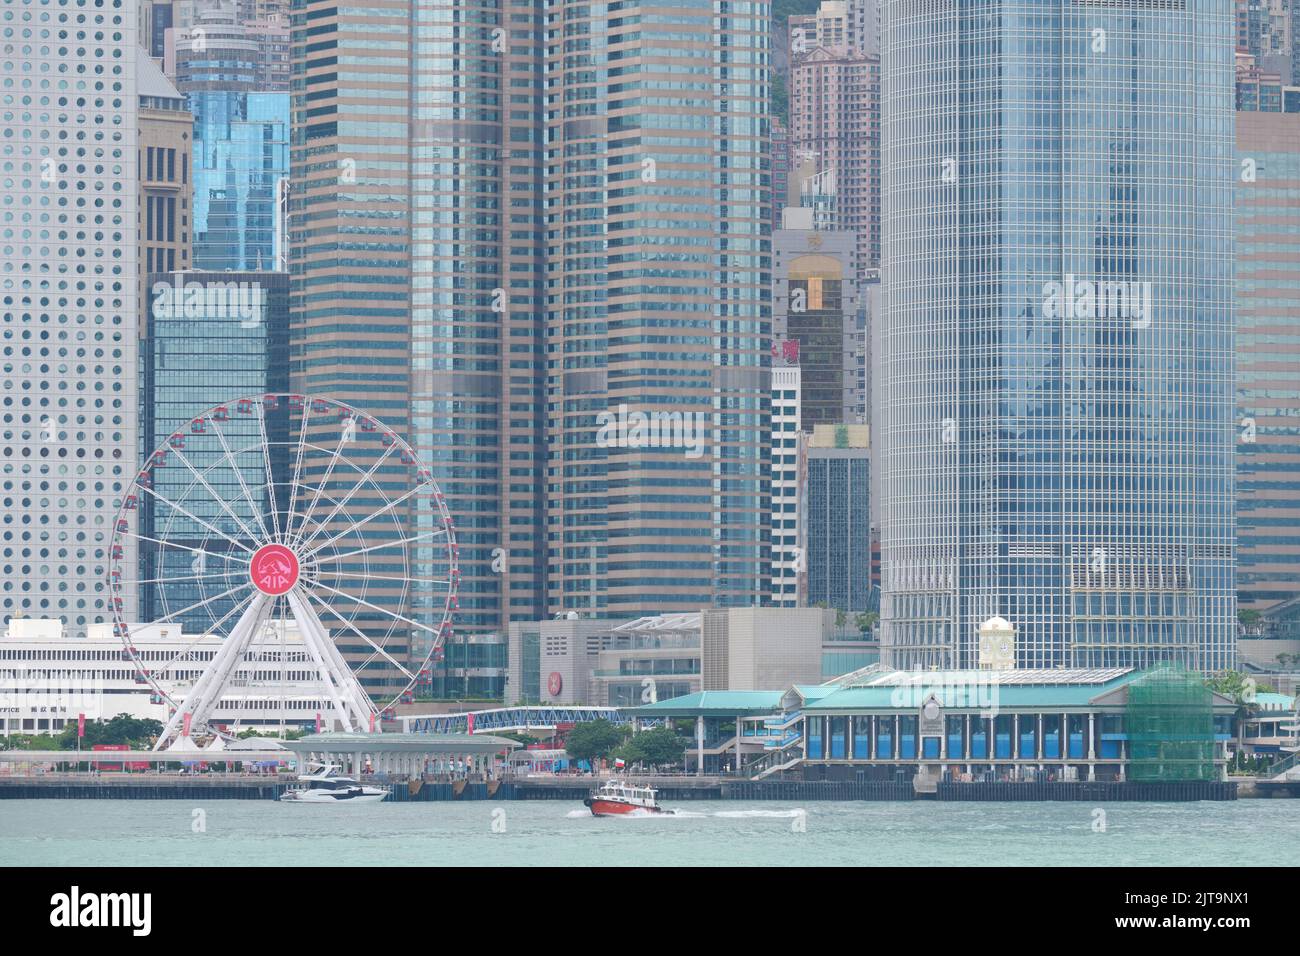 The Ferris wheel in Central, Hong Kong with commercial buildings Stock Photo